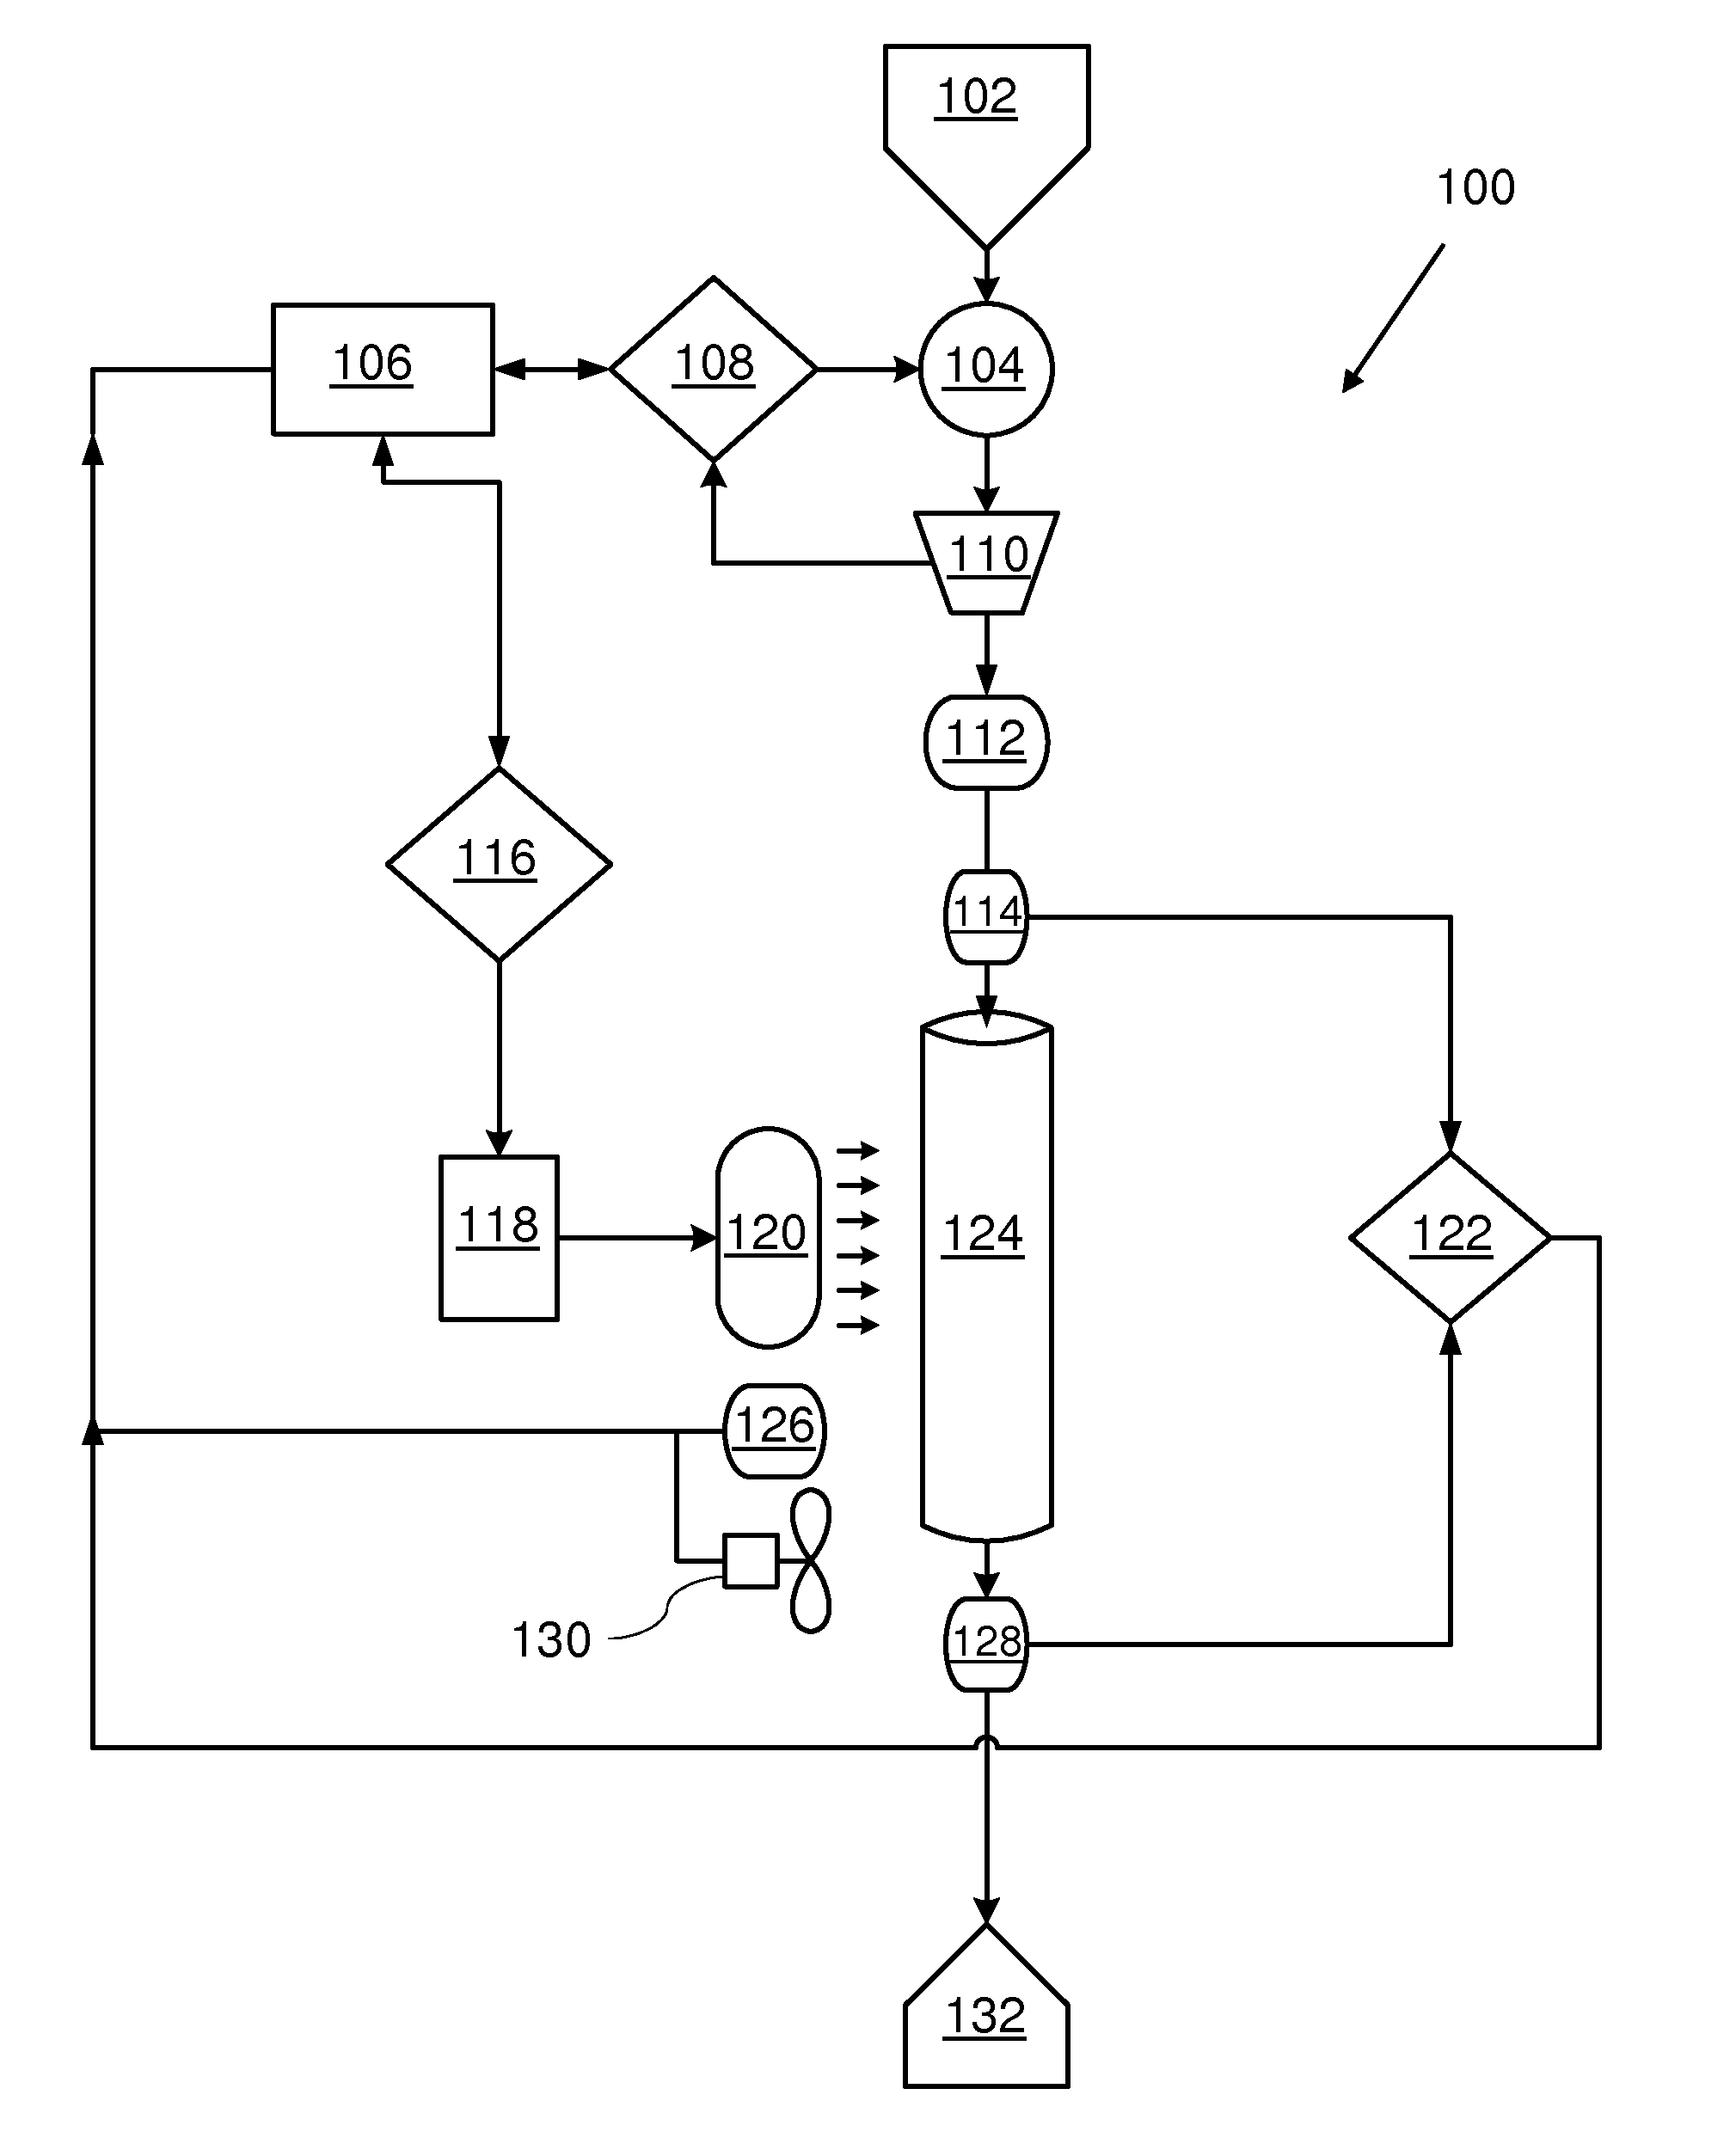 Systems and methods for reduction of pathogens in a biological fluid using variable fluid flow and ultraviolet light irradiation